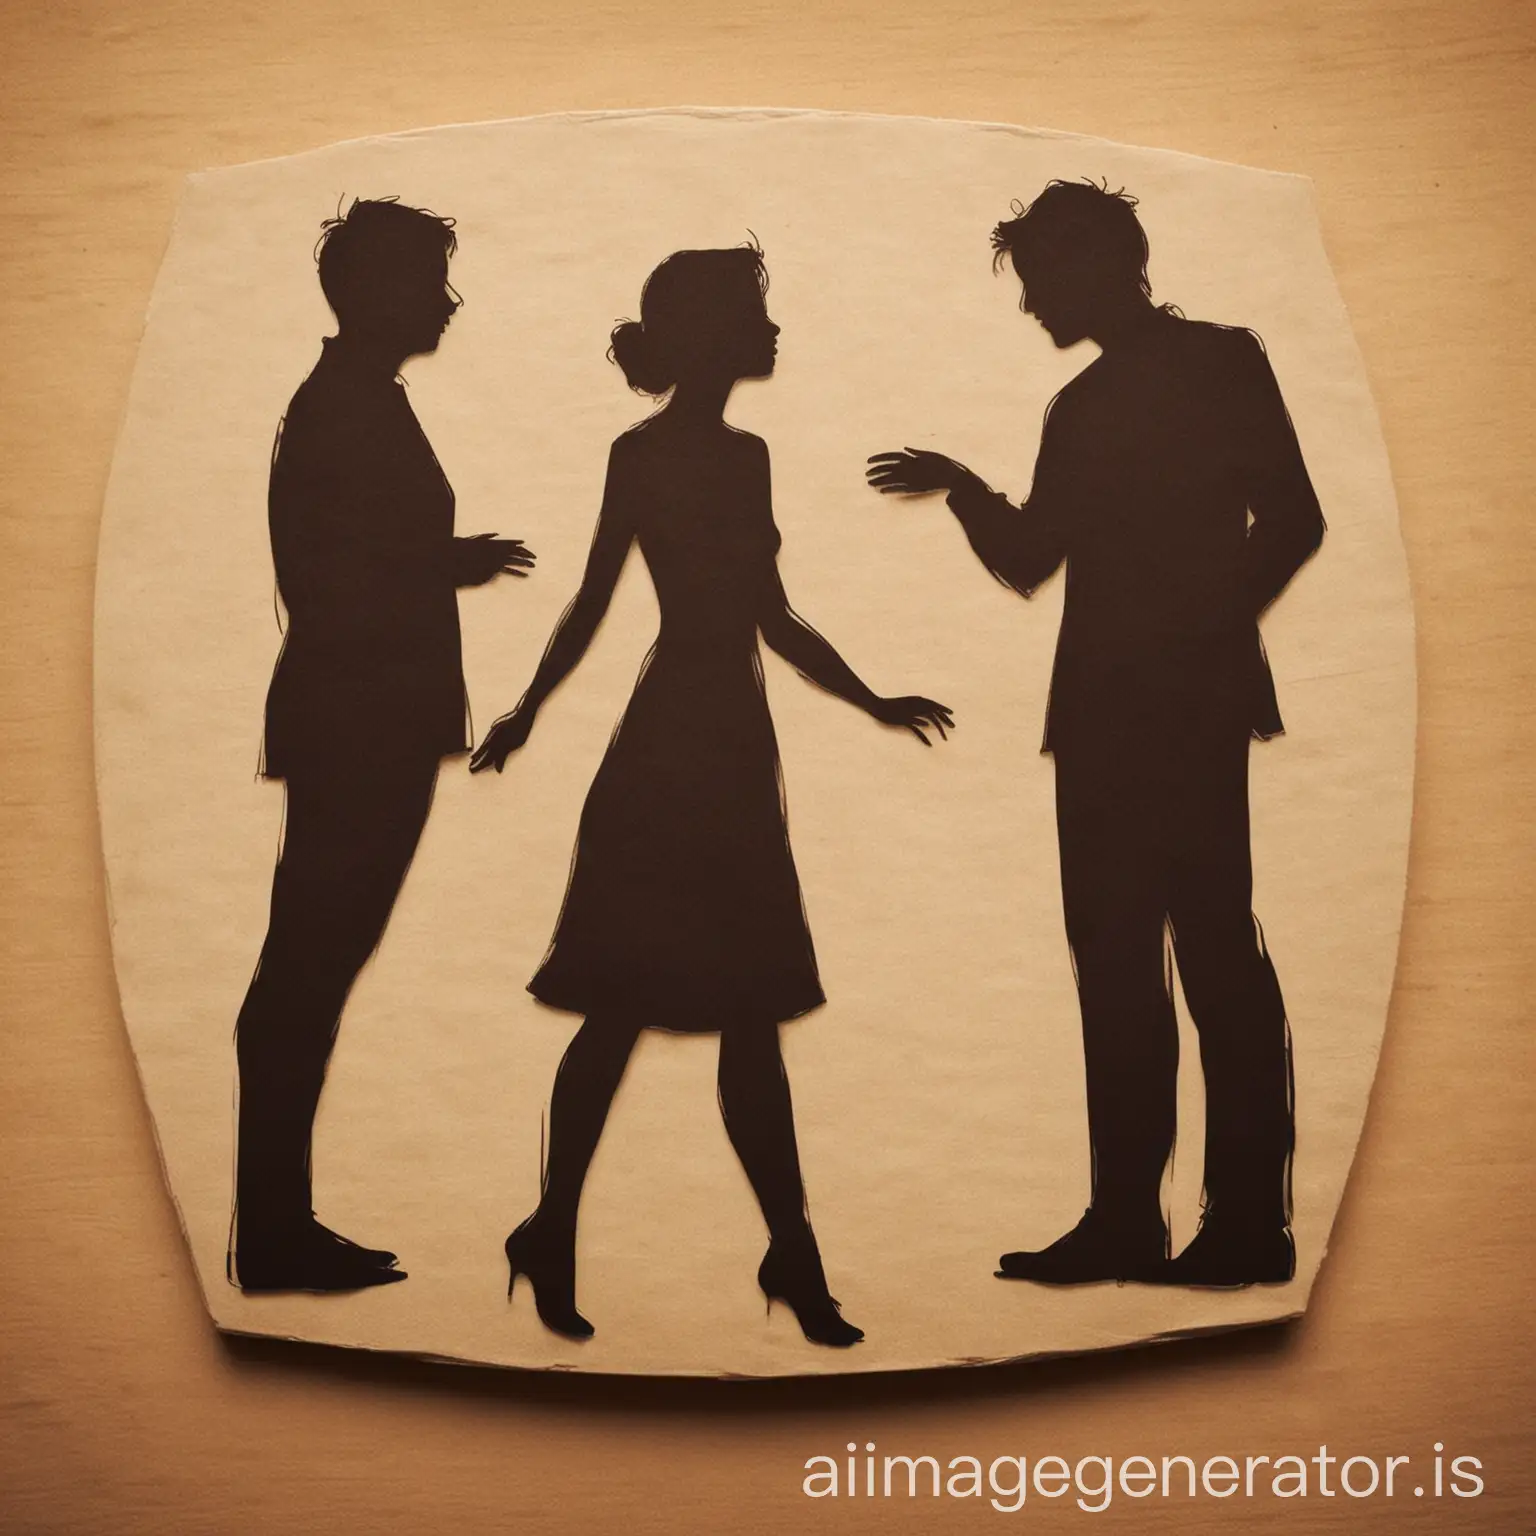 Generate a set of artistic silhouettes or simple sketches showcasing intimacy between couples, trios, and groups of four. The images should convey romantic and affectionate interactions, suitable for a game board background. The style should be elegant and subtle, focusing on the emotional connection and tenderness between the figures. Avoid explicit or overtly sexual content, ensuring the images remain tasteful and appropriate for all audiences.